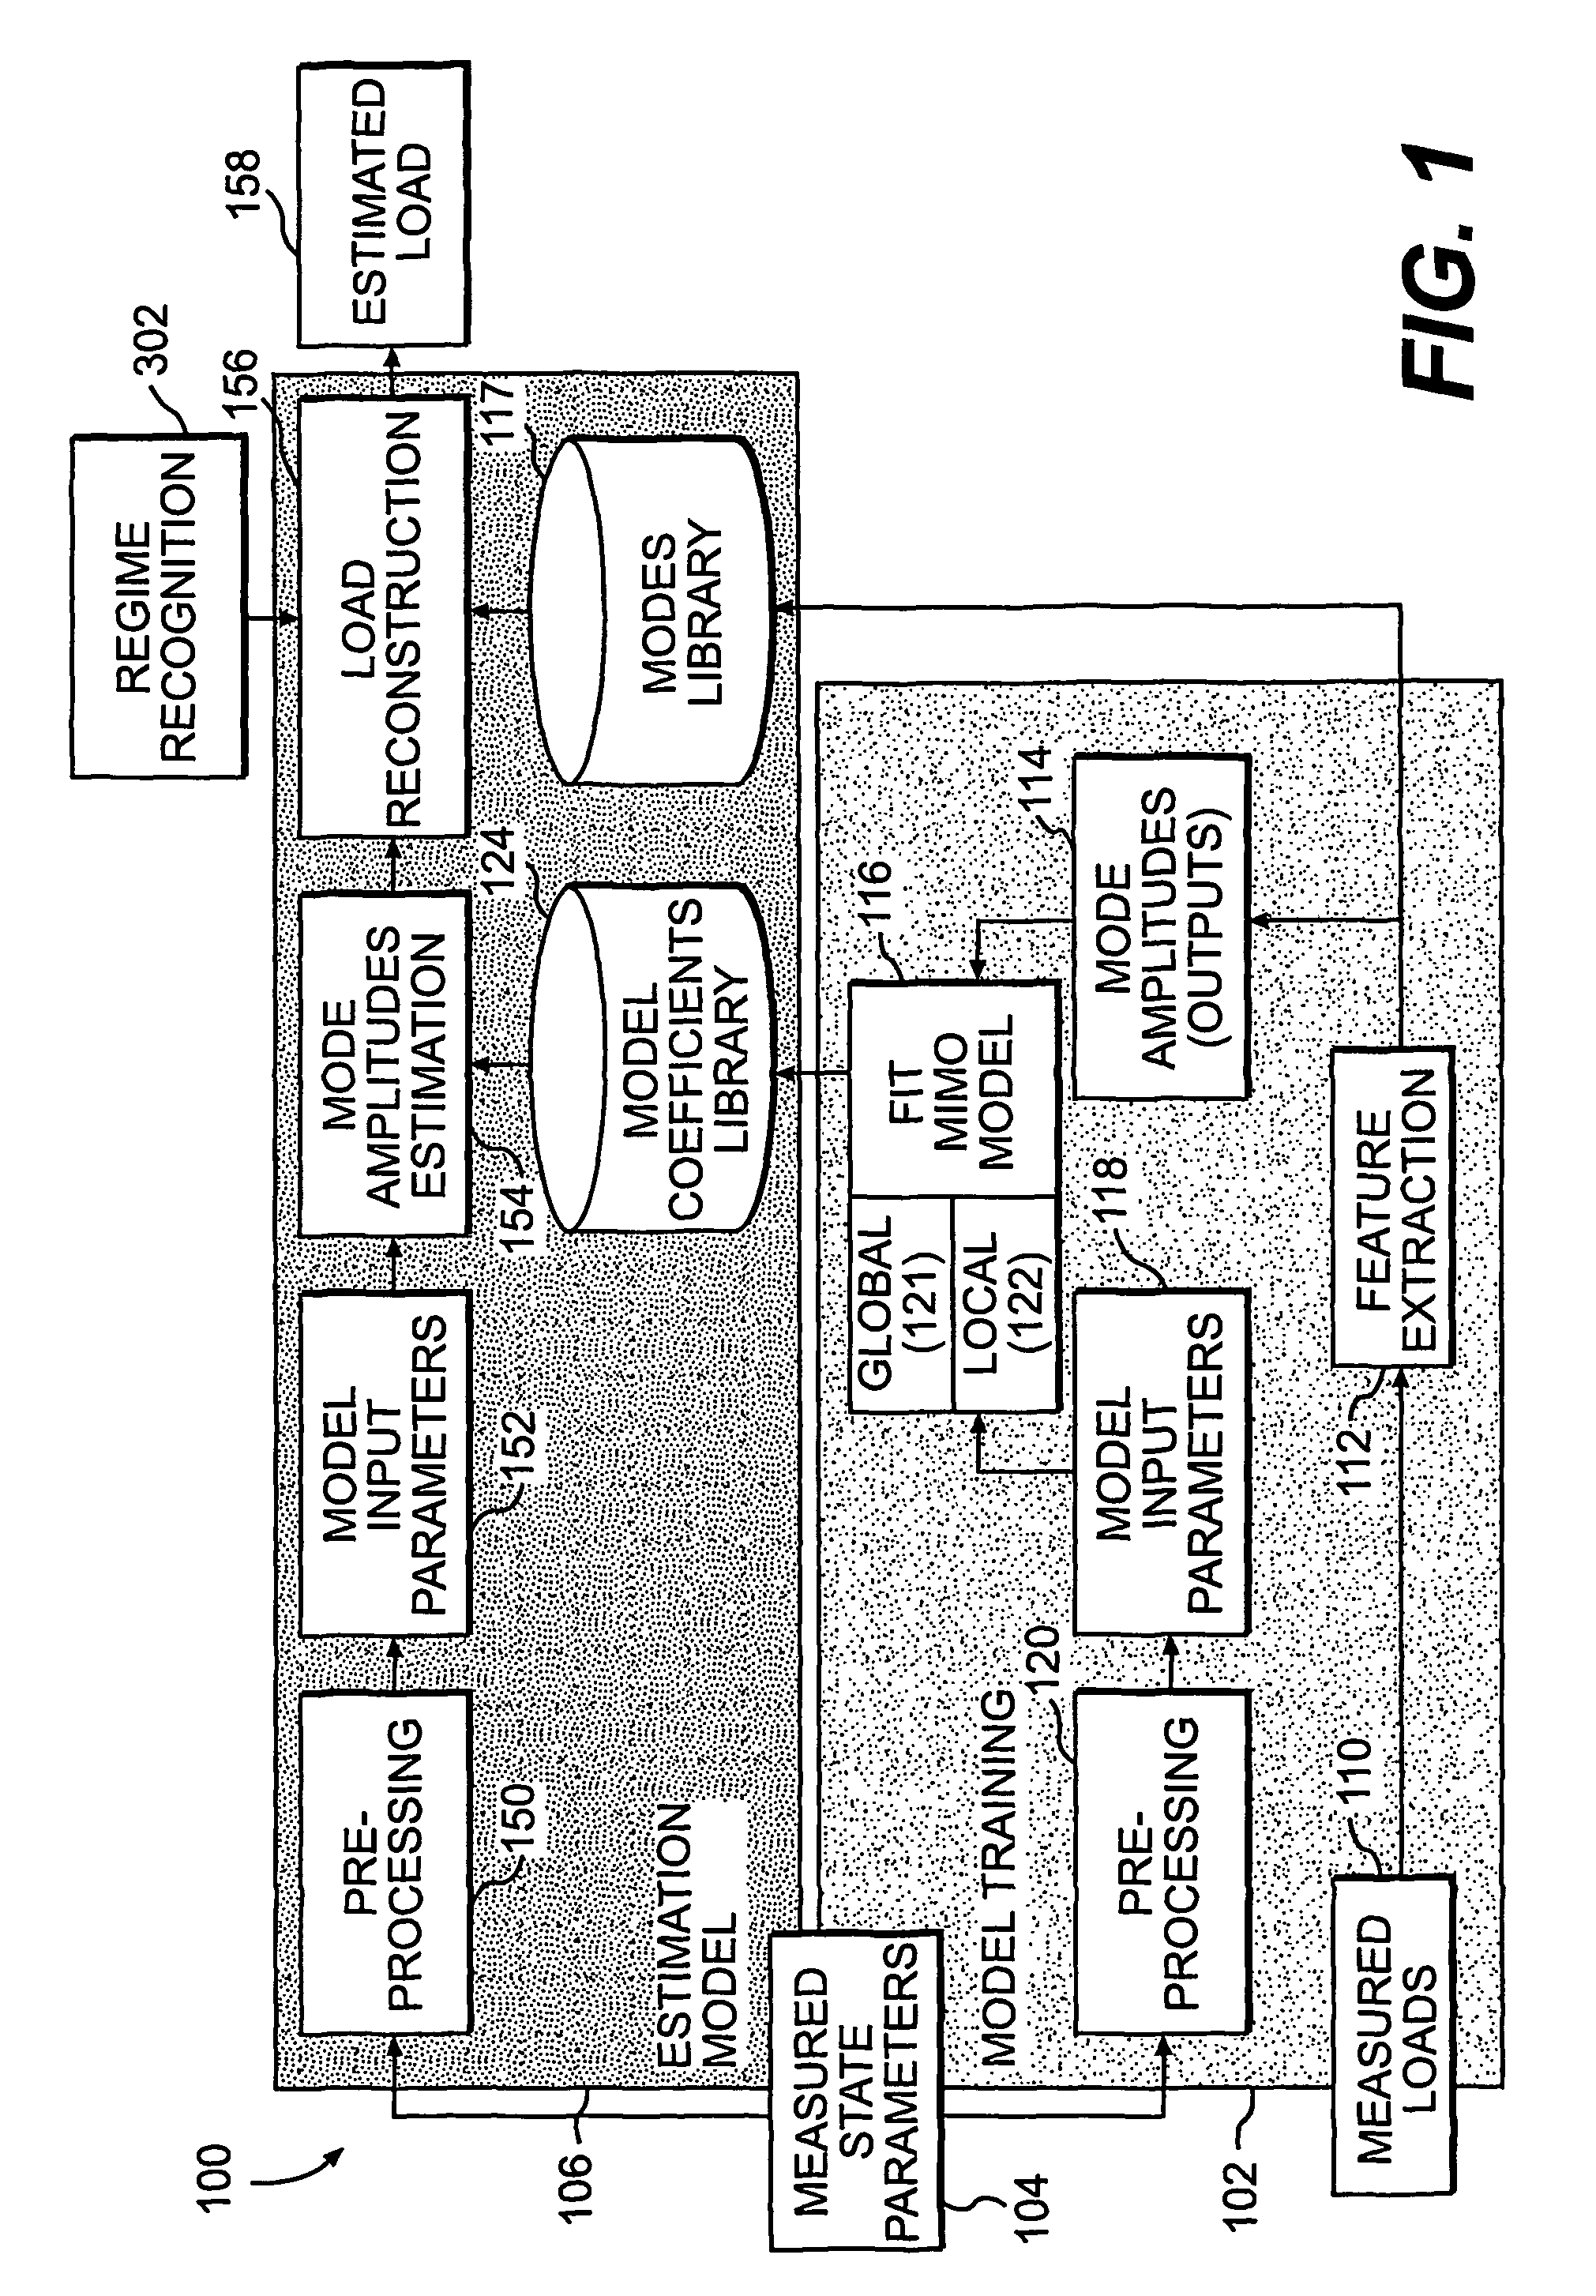 Virtual load monitoring system and method